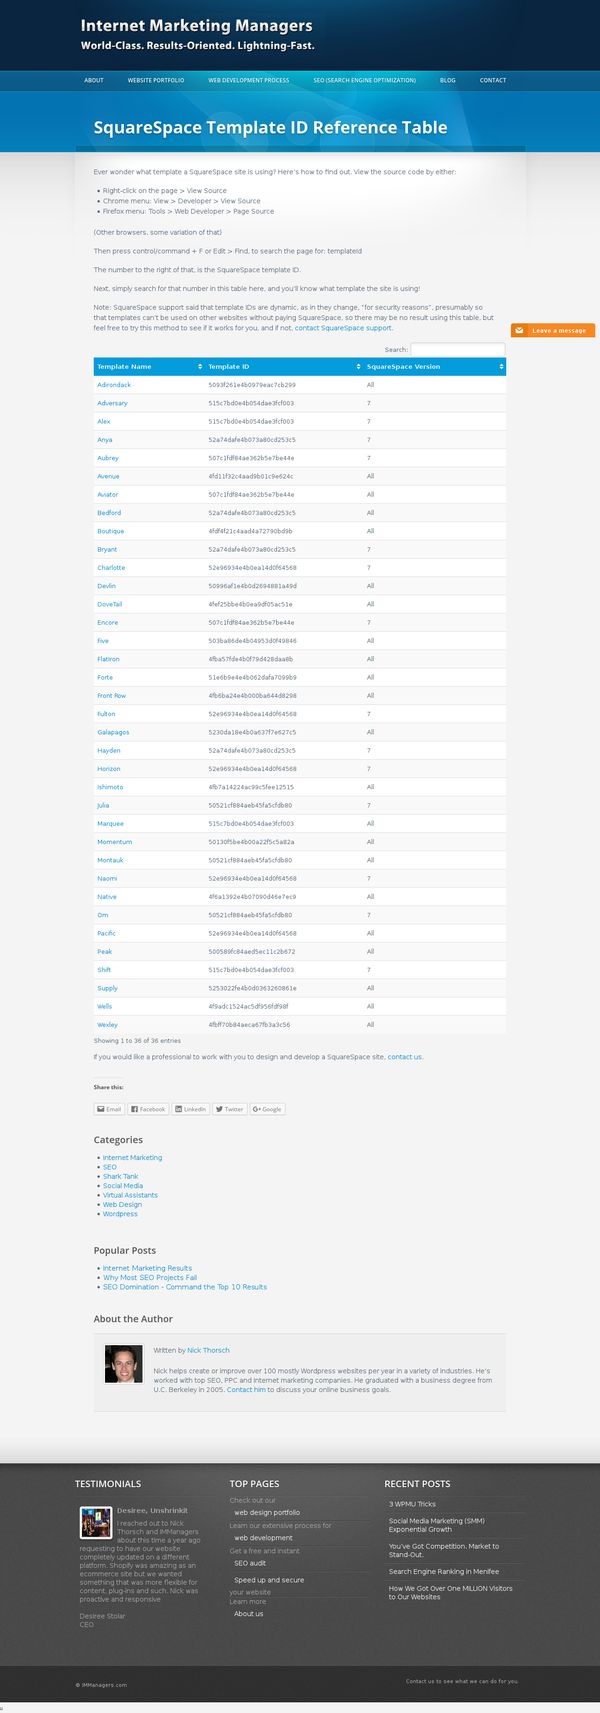 /squarespace-template-id-reference-table/